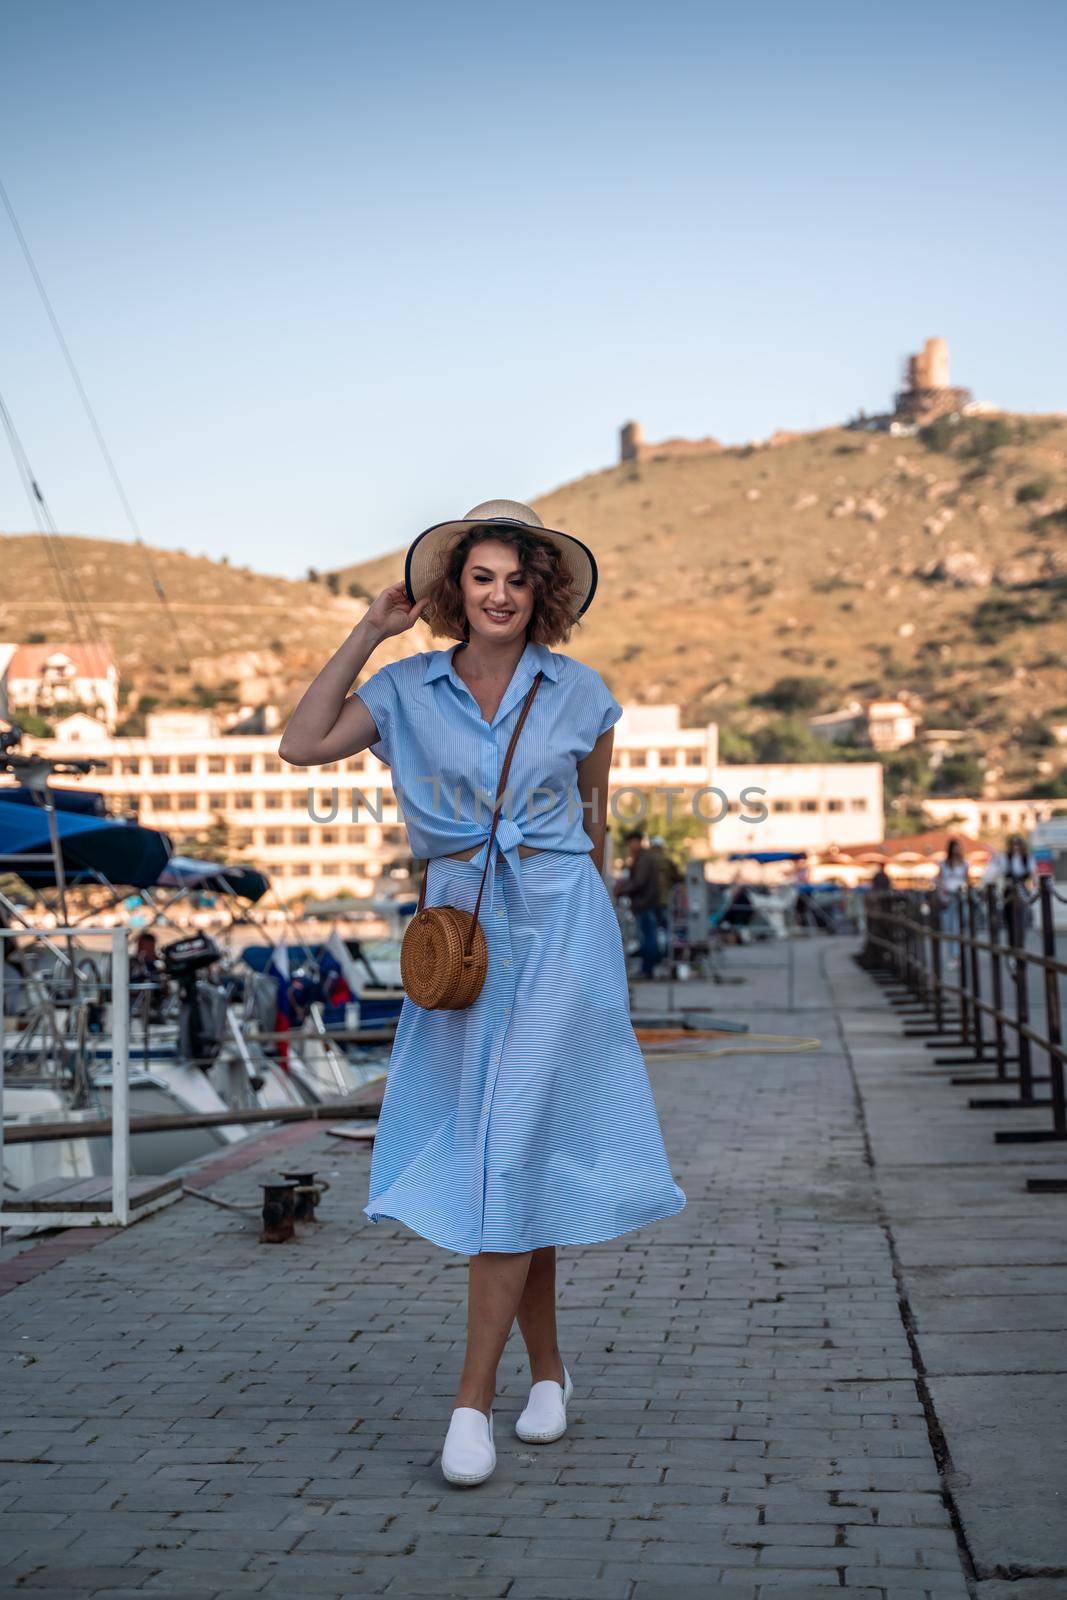 A young happy woman in a blue dress and hat stands near the seaport with luxury yachts. Travel and vacation concept by Matiunina